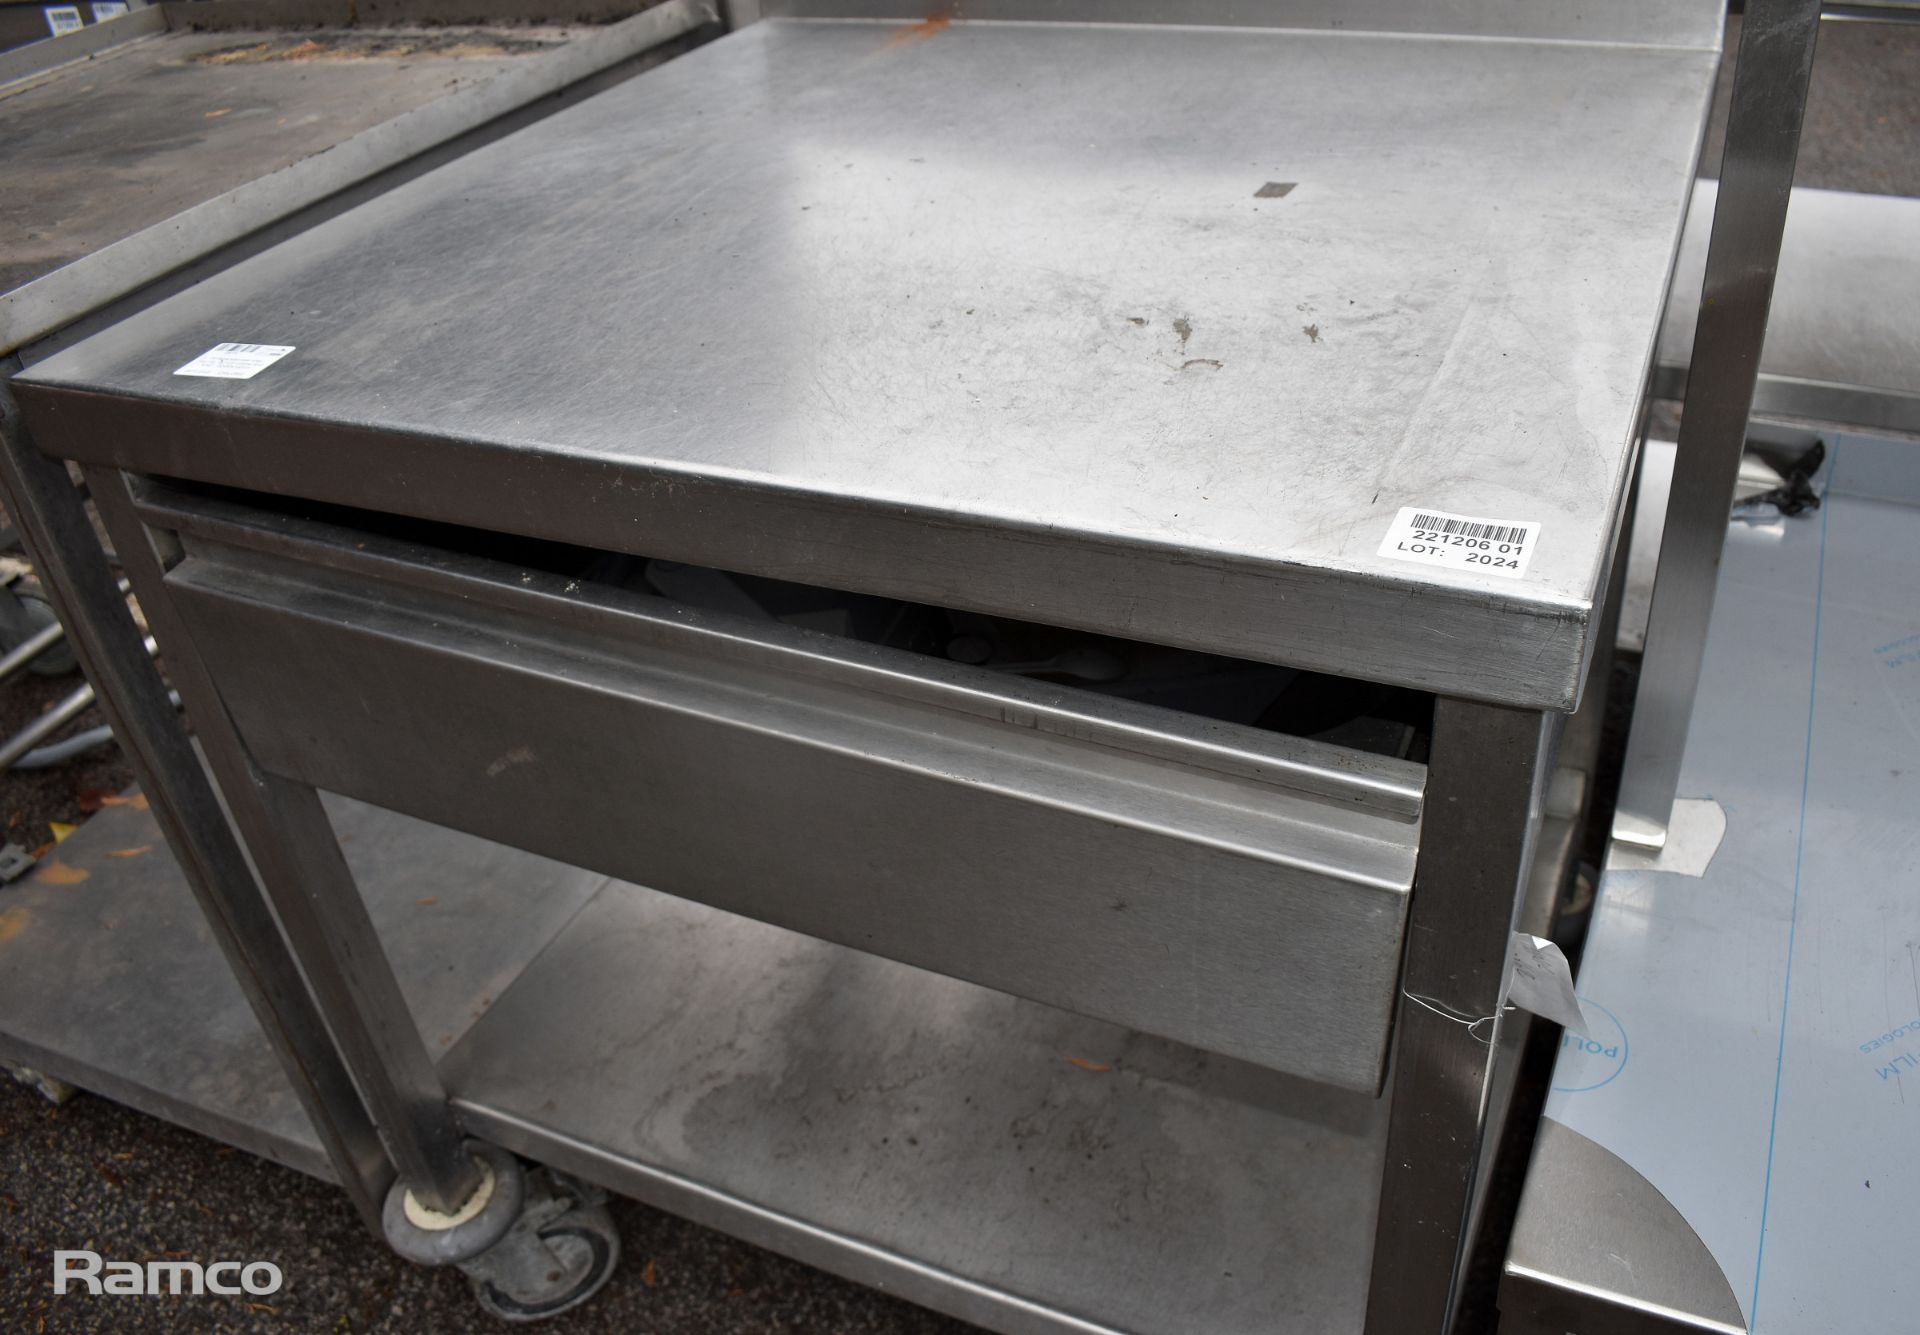 Portable stainless steel countertop with drawer and shelf - 80 x 80 x 102cm - Image 3 of 3